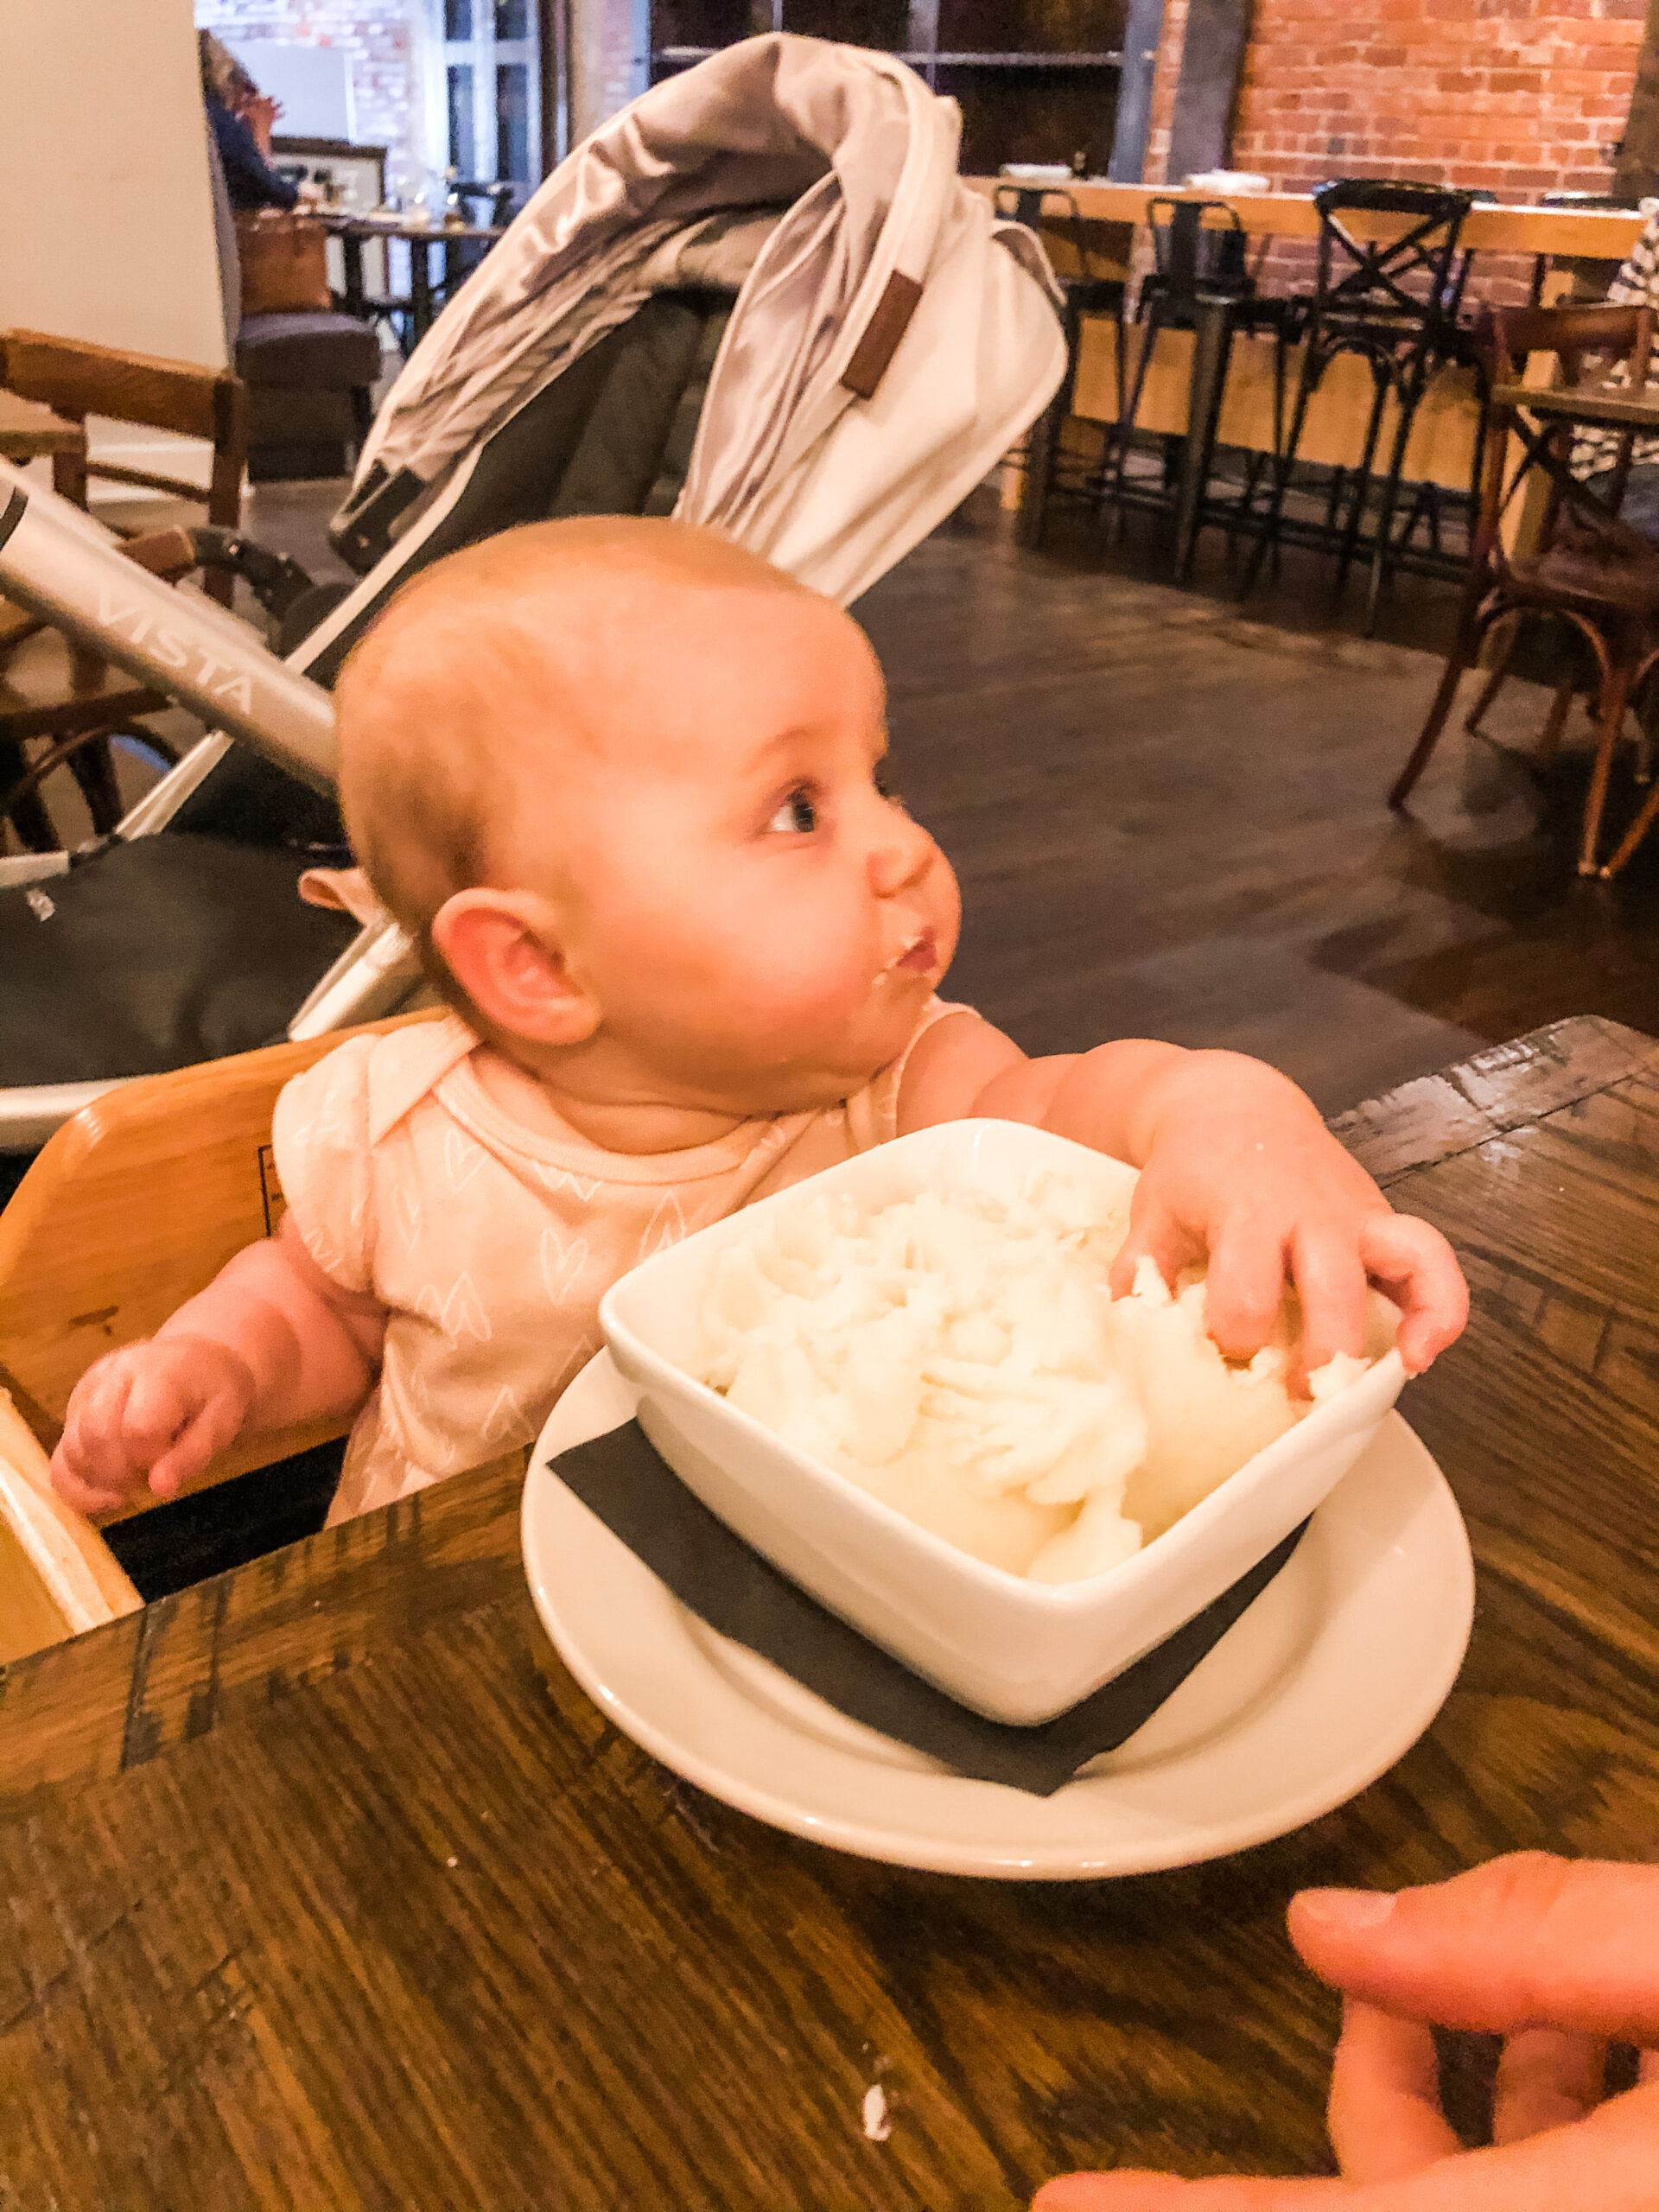 Baby-led Weaning: The Next Milestone for Your Baby